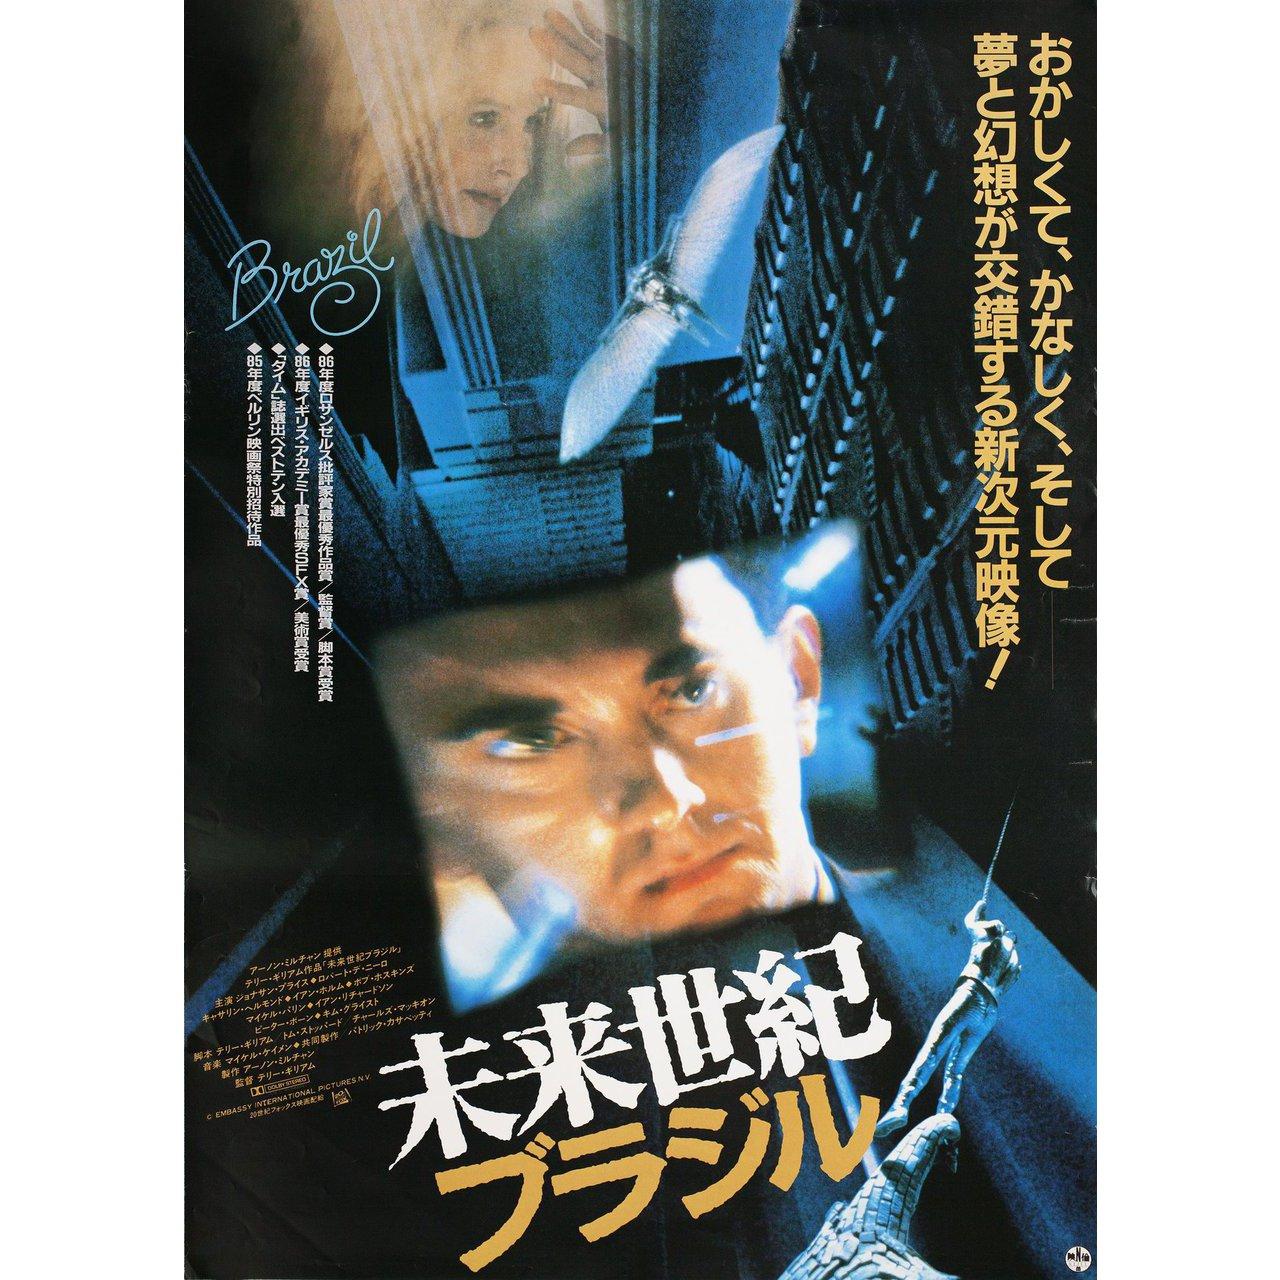 Original 1986 Japanese B2 poster for the film Brazil directed by Terry Gilliam with Jonathan Pryce / Robert De Niro / Katherine Helmond / Ian Holm. Very good-fine condition, rolled with edge and handling wear. Please note: the size is stated in